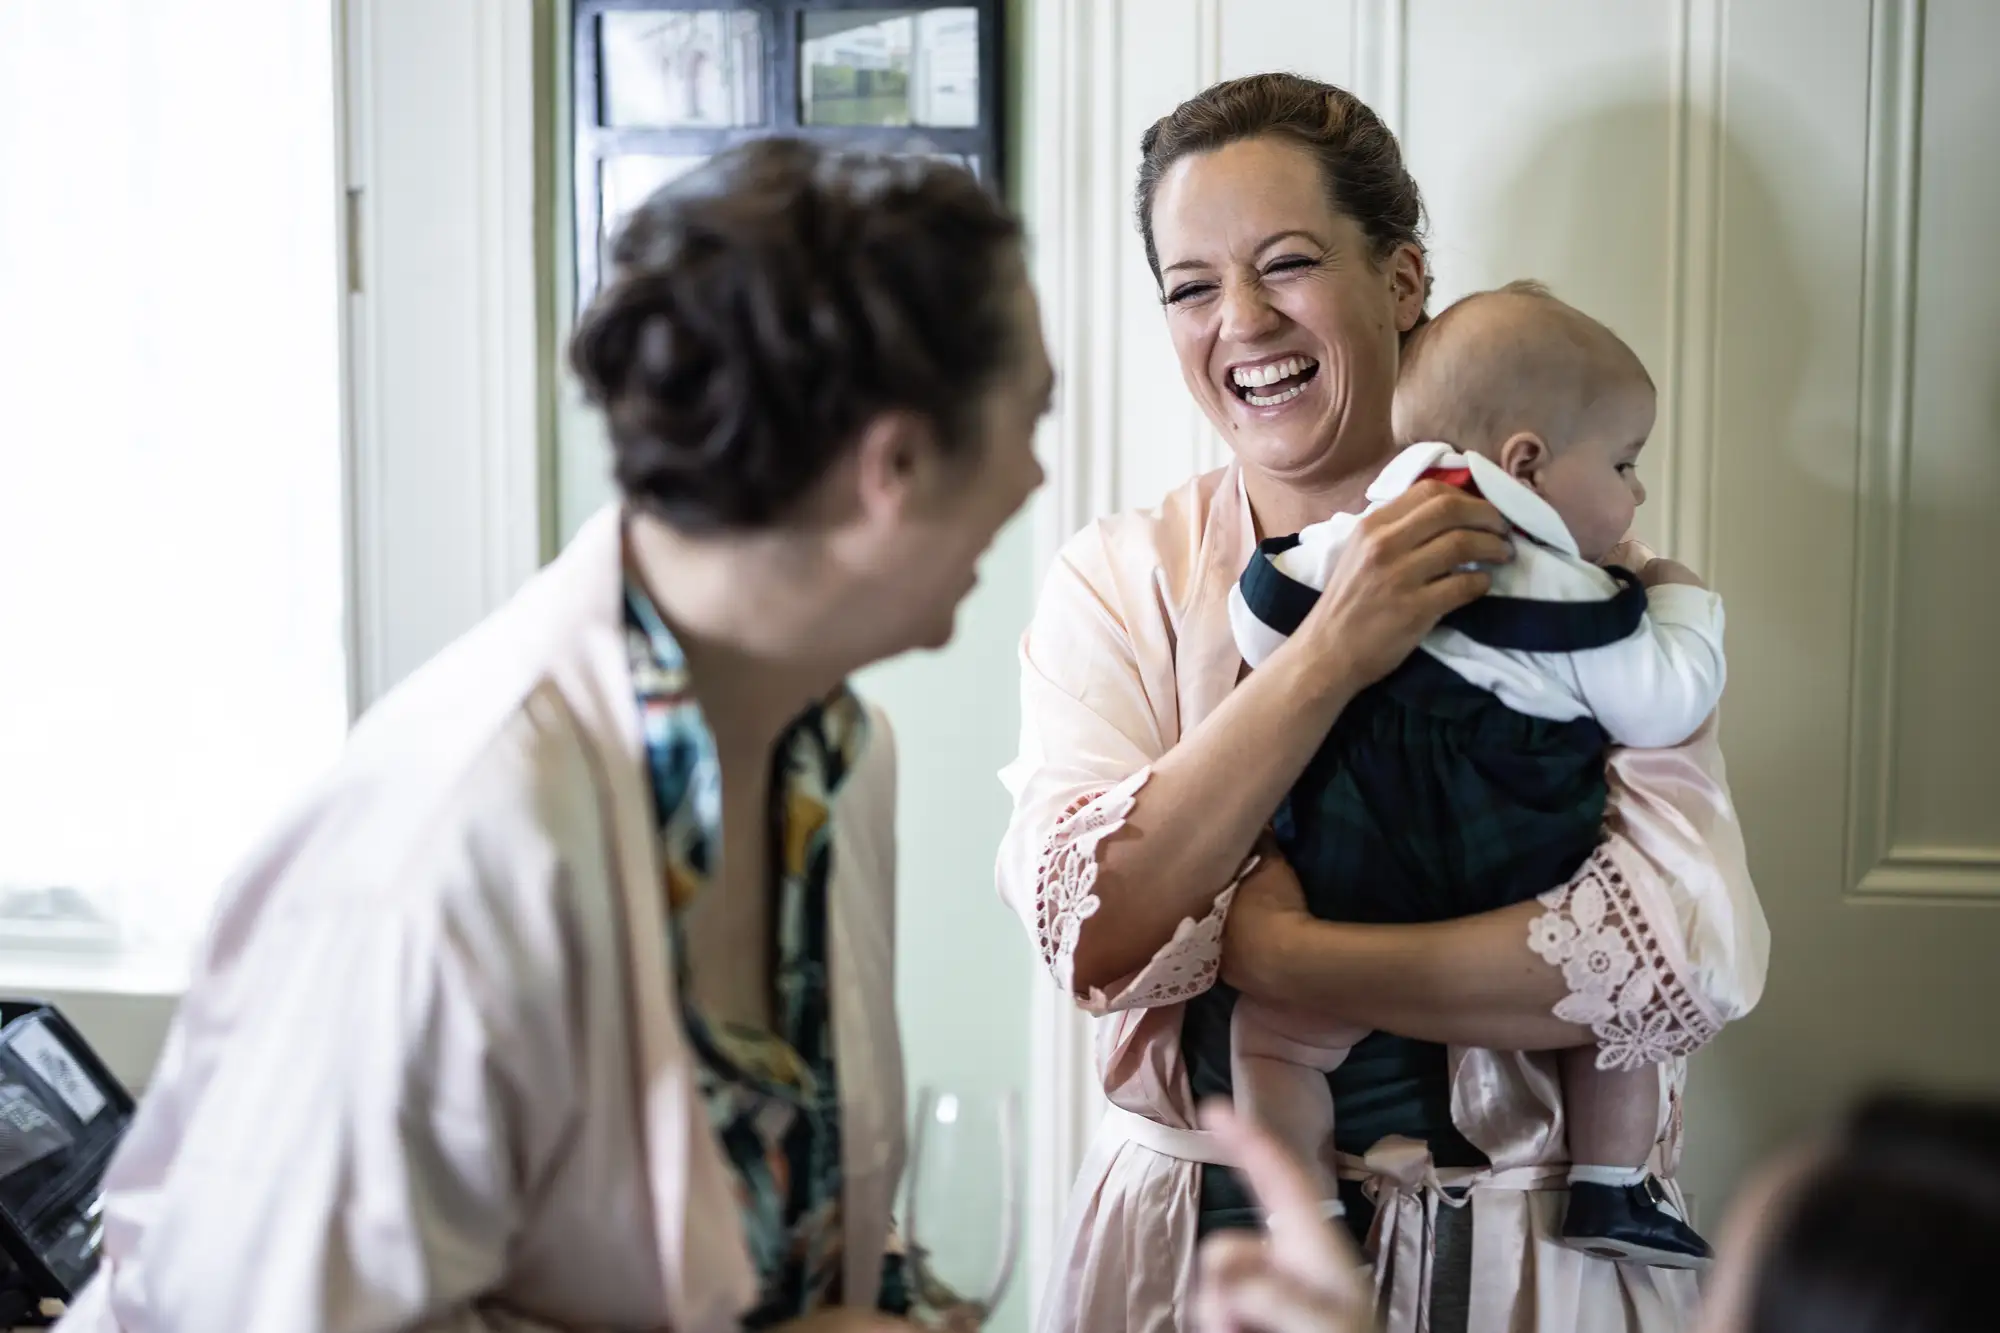 A woman in a pink dress smiles joyfully while holding a baby, conversing with another woman in a cafe setting.